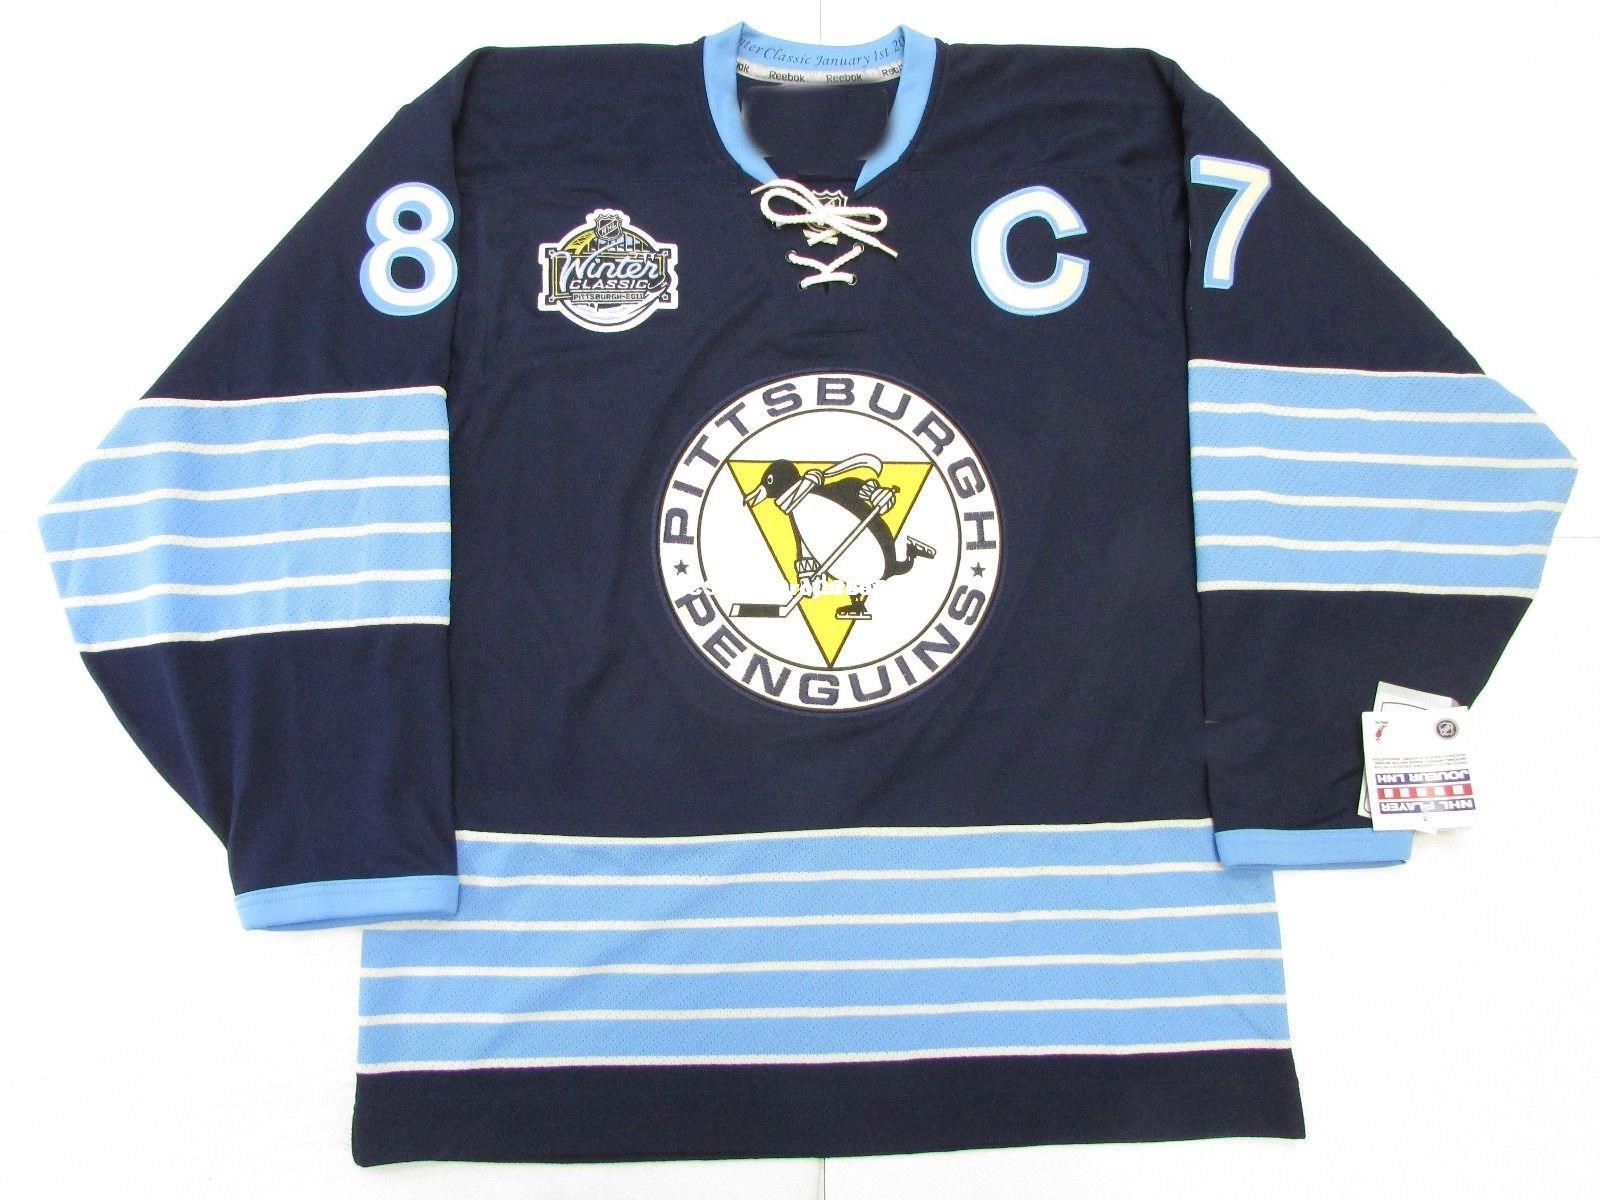 pittsburgh penguins classic jersey